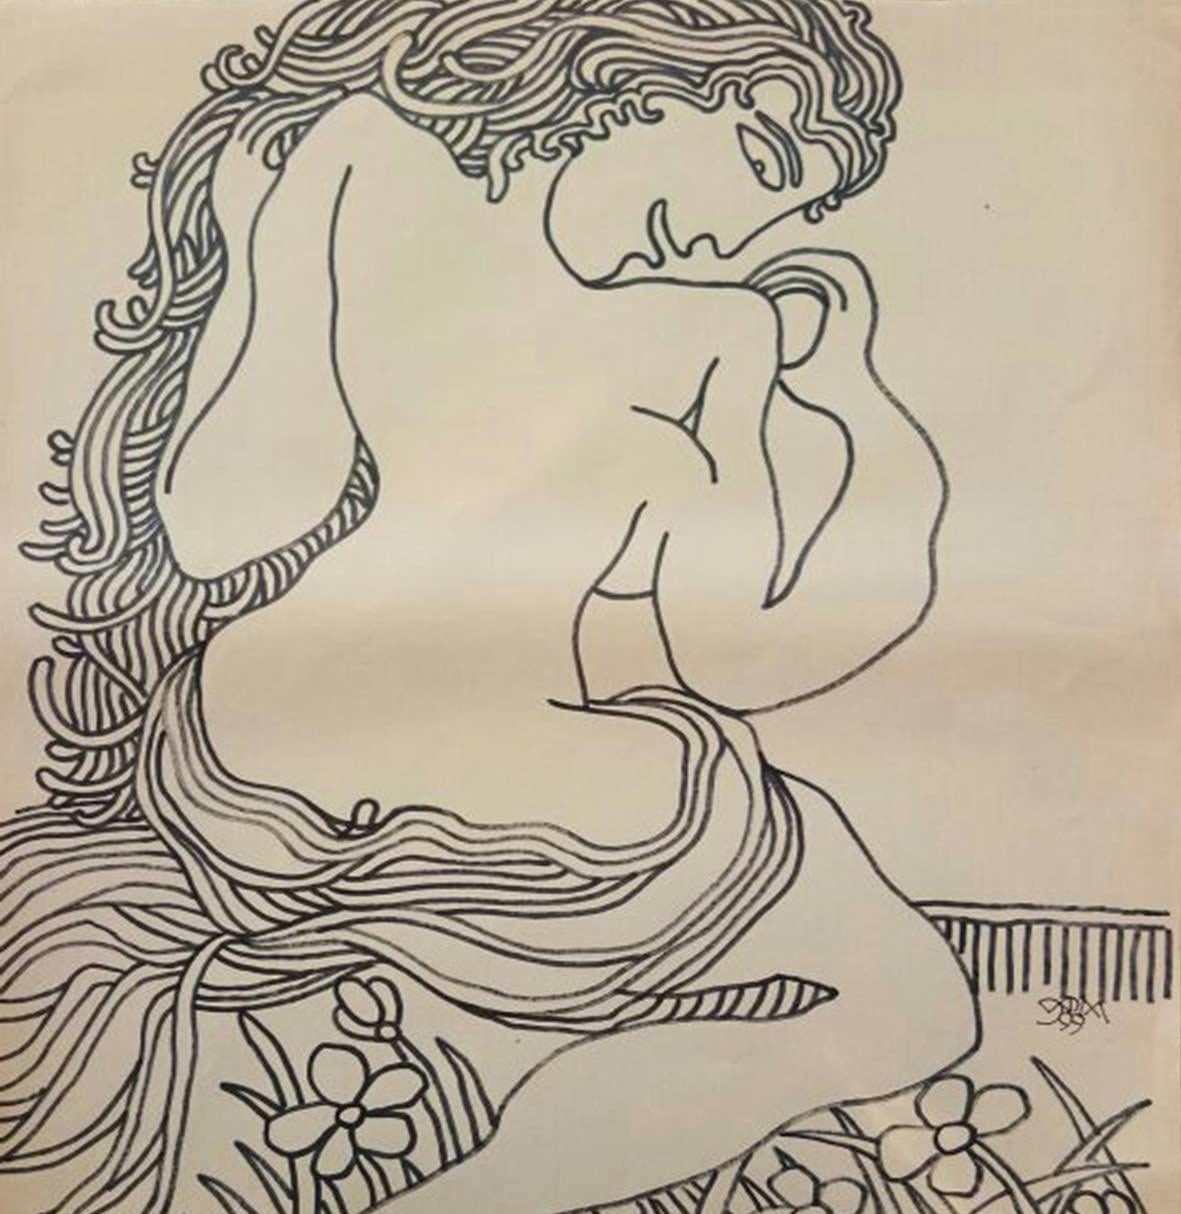 Nude Woman in Garden, Drawing, Marker on Paper by Modern Indian Artist